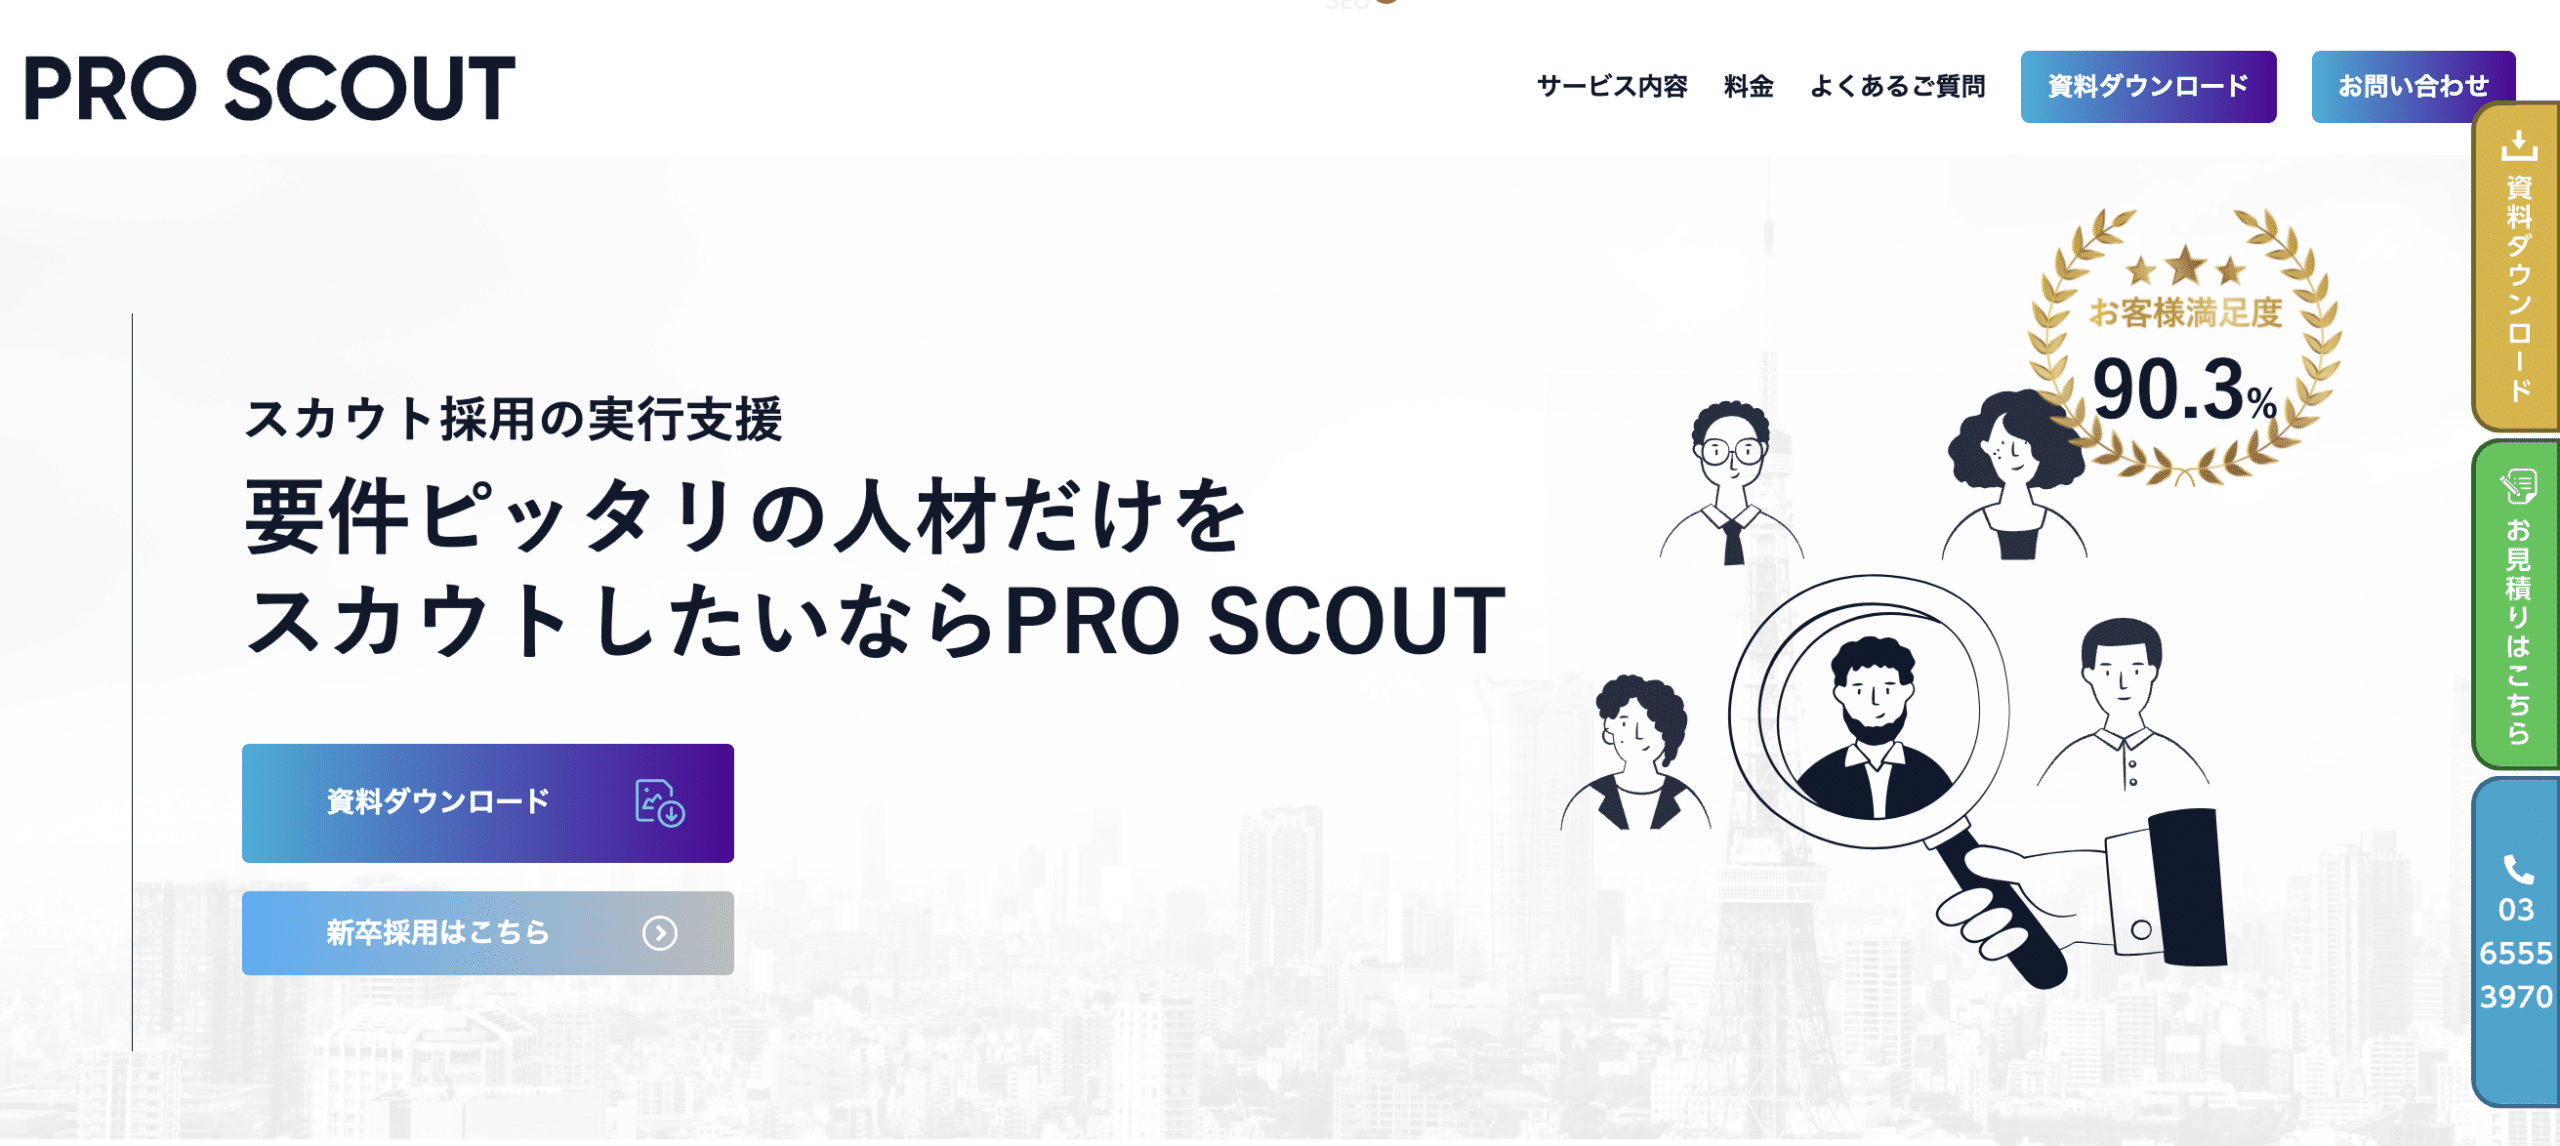 proscout